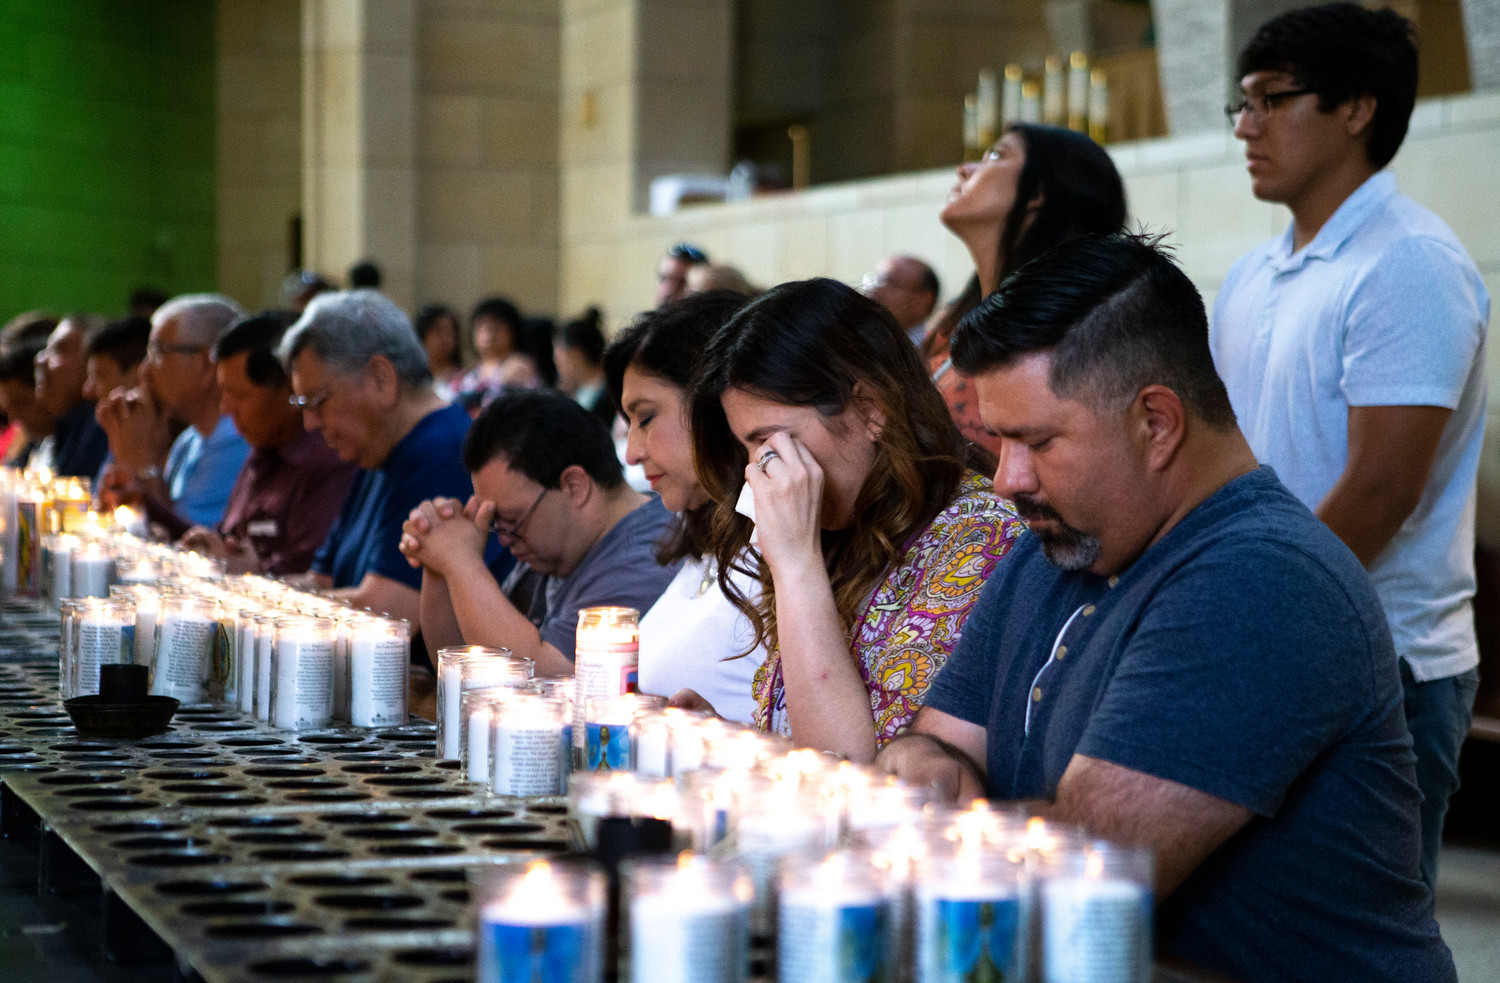 Worshipers pray before a July 1 Mass at the Basilica of Our Lady of San Juan del Valle in San Juan, Texas. A delegation of U.S. bishops concelebrated the Mass at the beginning of their fact-finding mission about Central American immigrant detention at the U.S.-Mexican border.